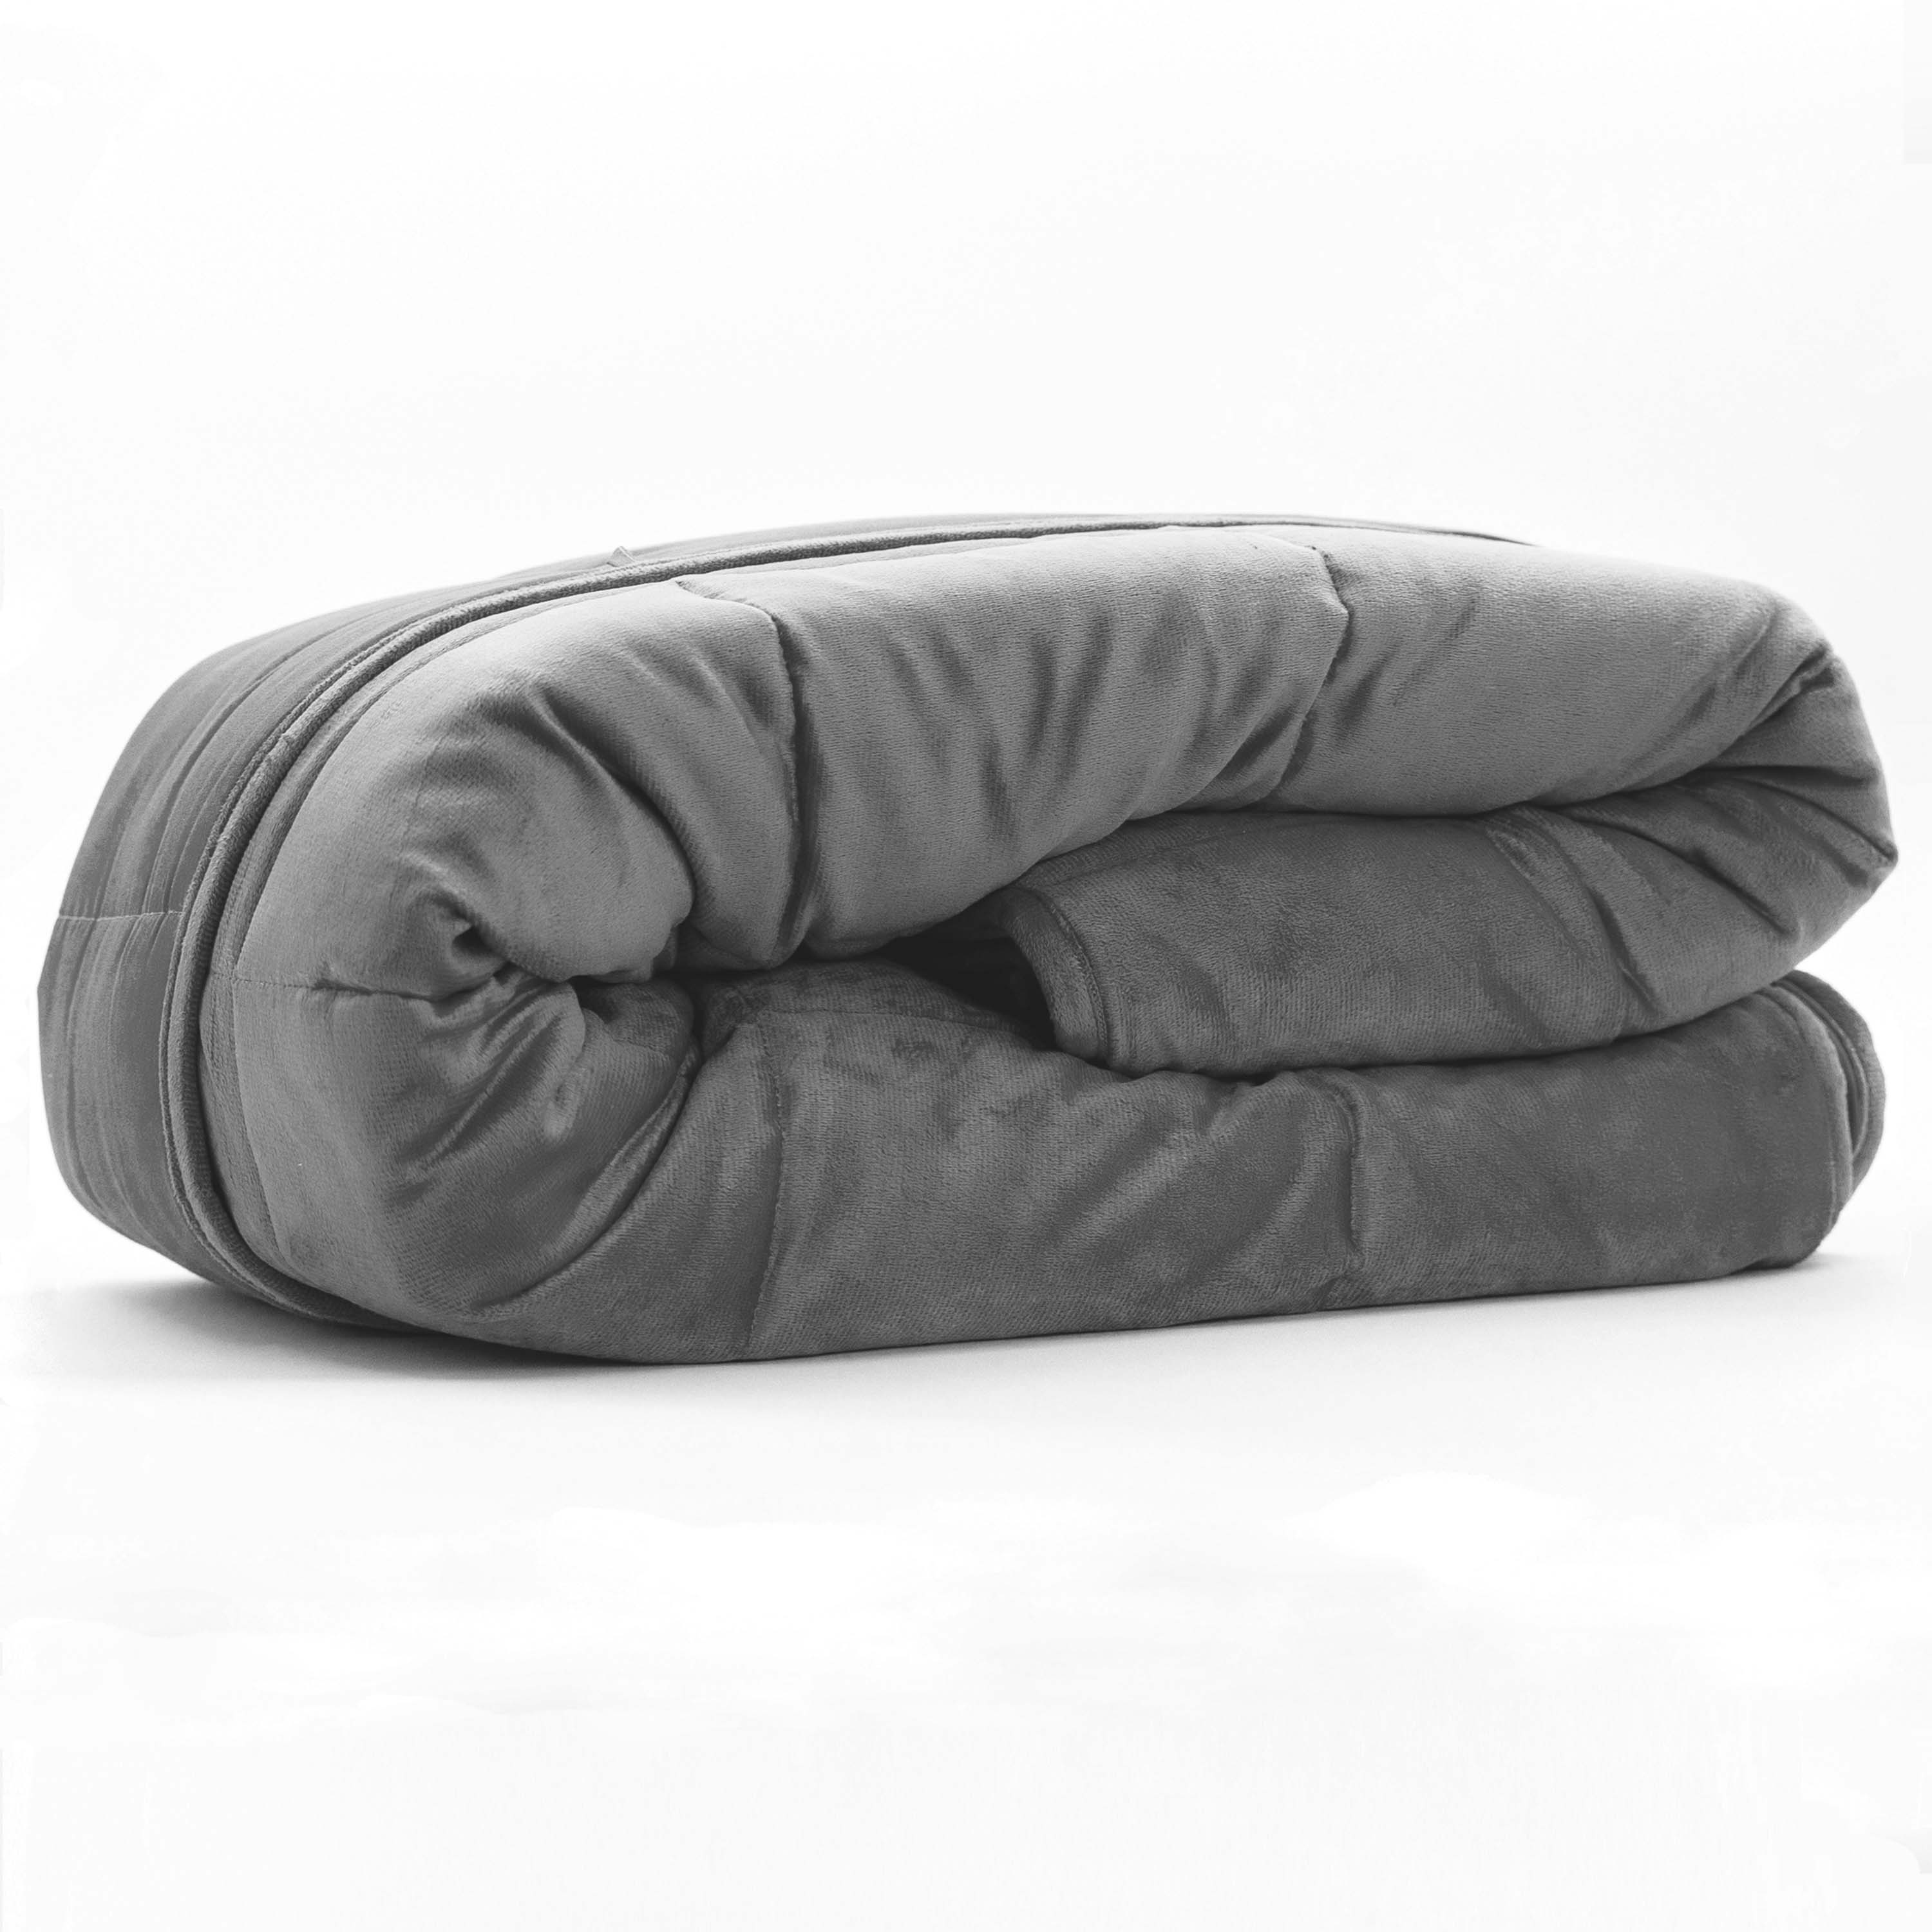 Tranquility Temperature Balancing 12lb Weighted Blanket - image 1 of 7